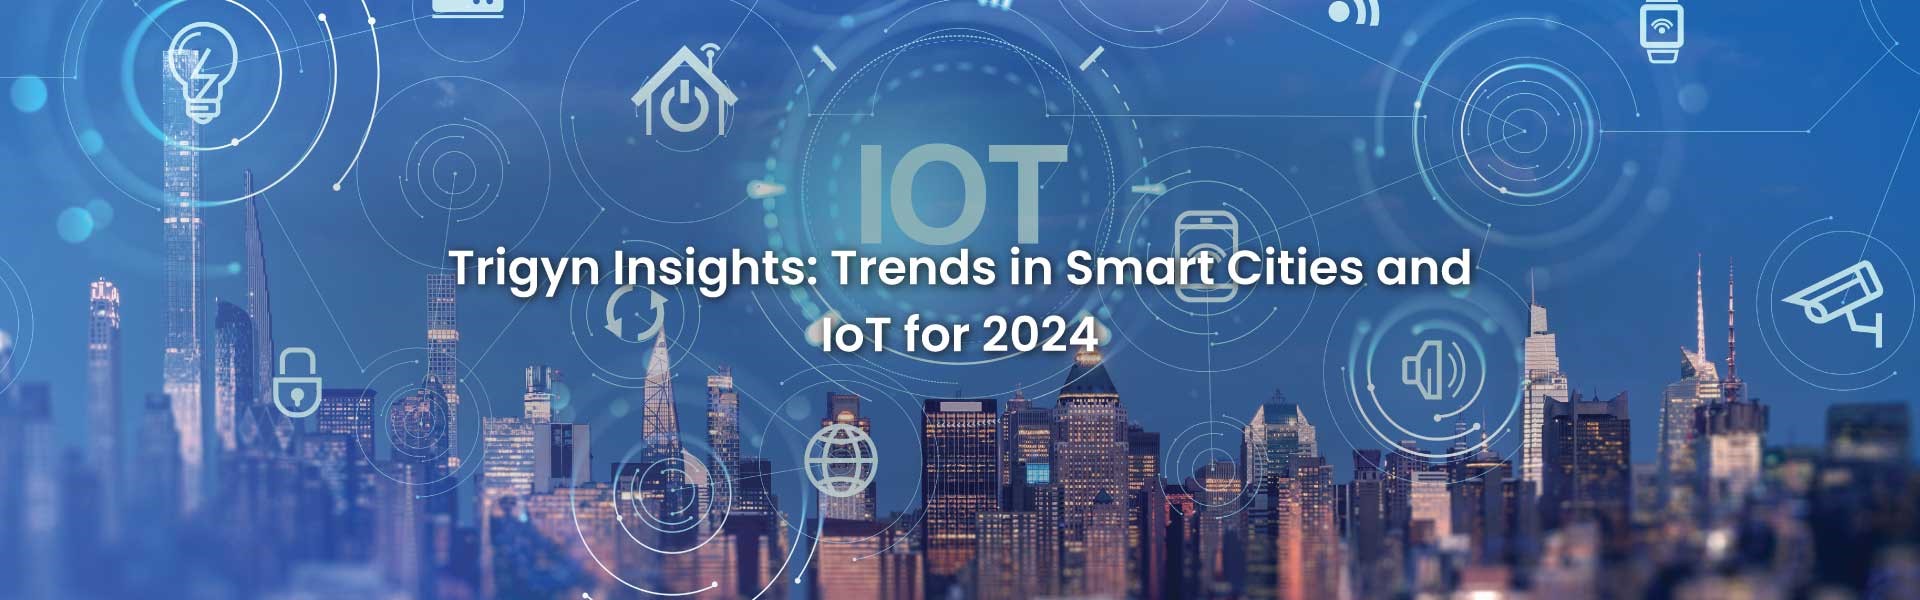 Trends in Smart Cities and IoT